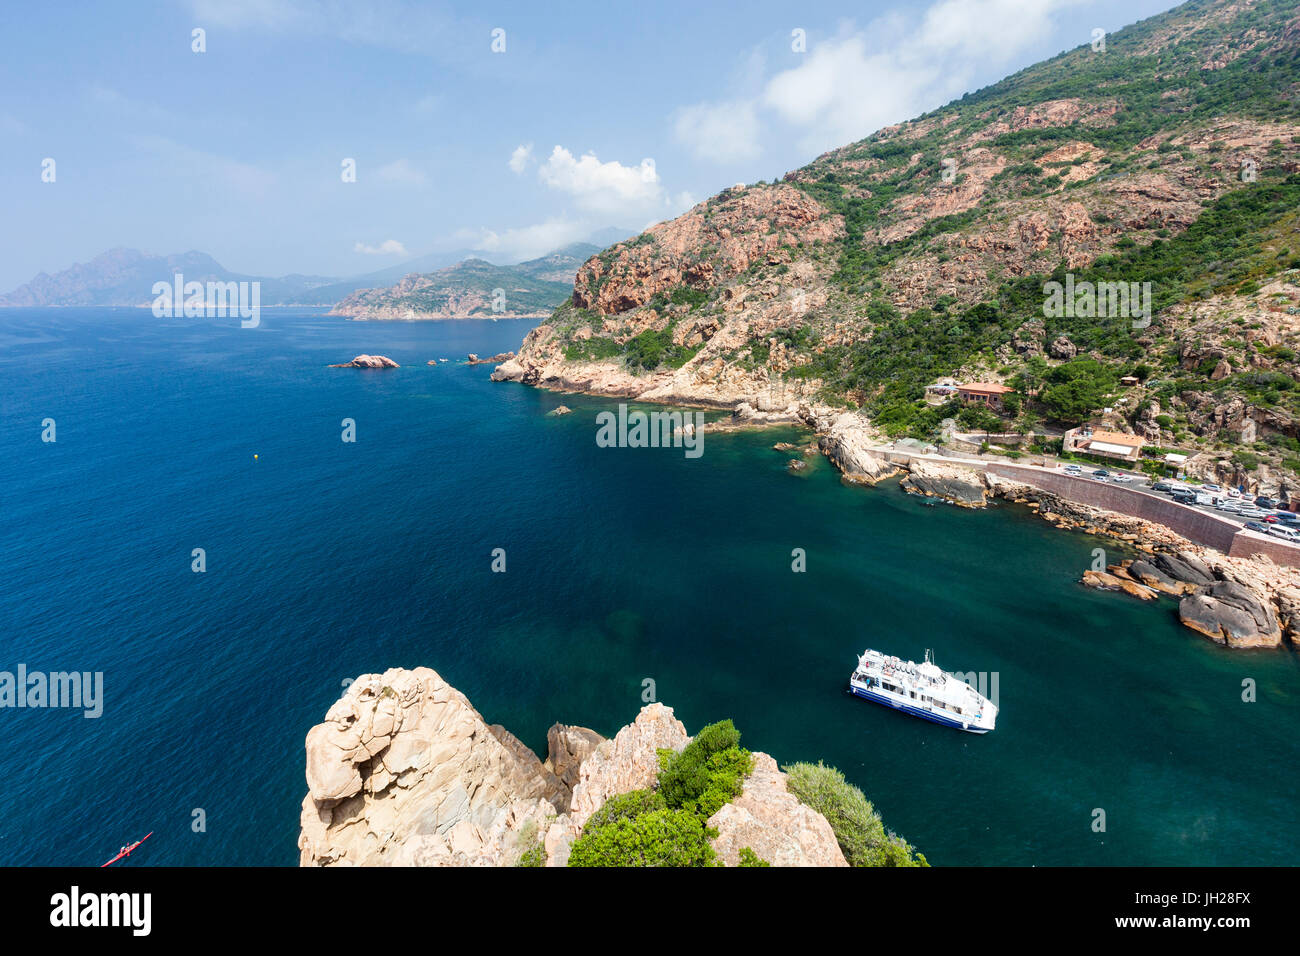 Tourist boat in the turquoise sea framed by limestone cliffs, Porto, Southern Corsica, France, Mediterranean, Europe Stock Photo